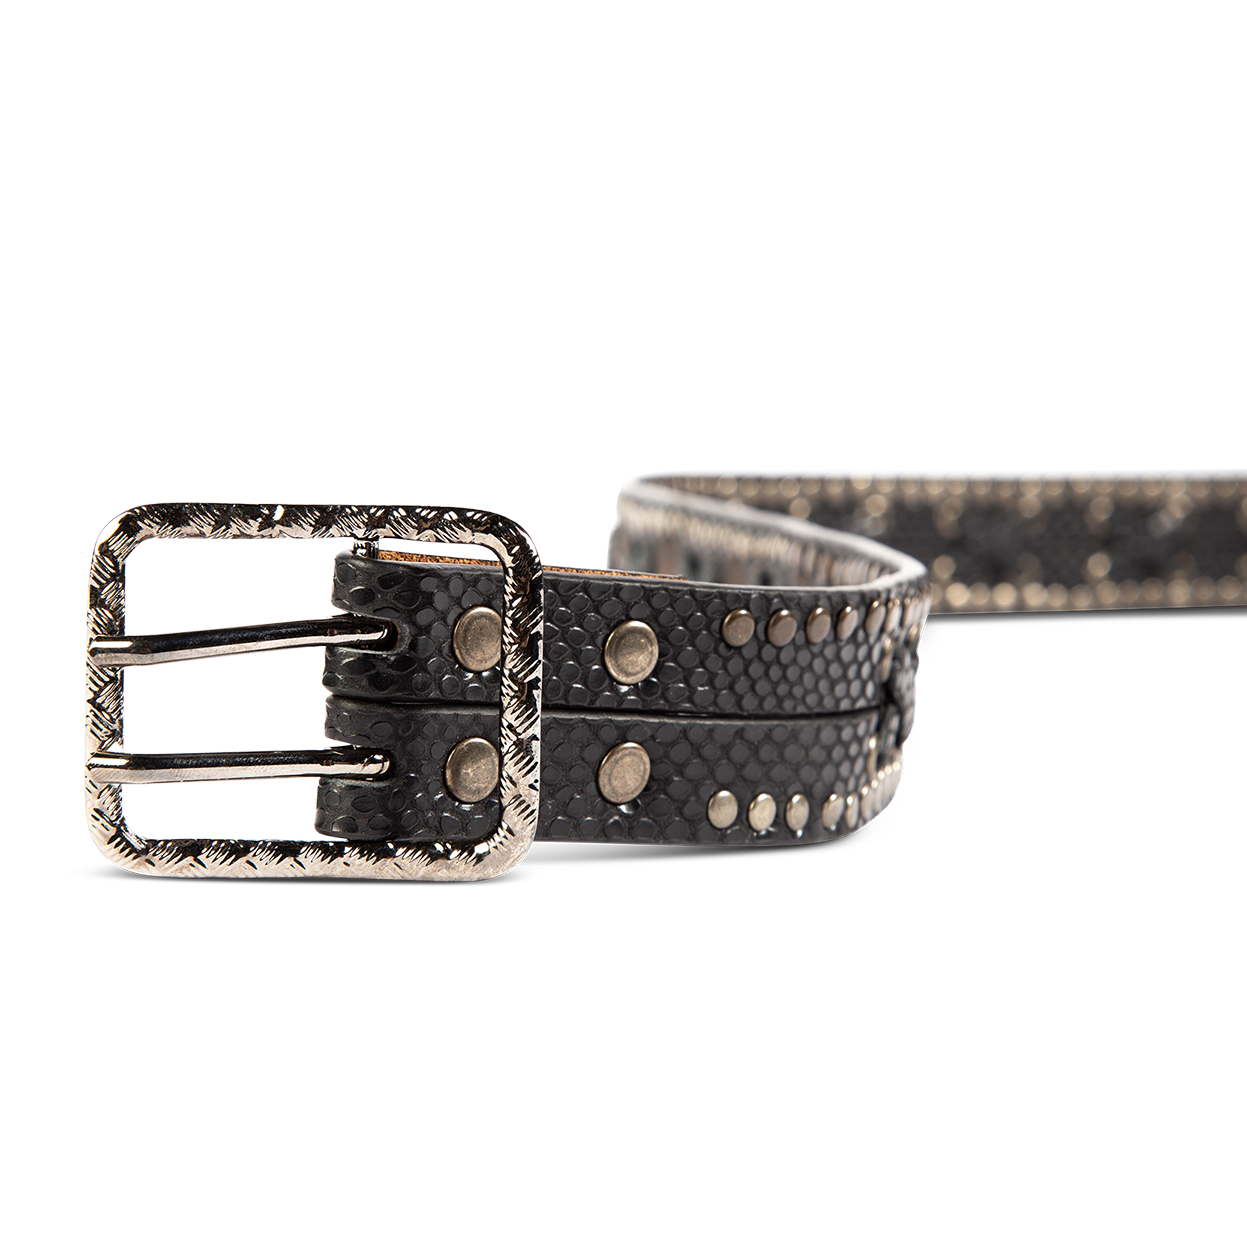 Cross black snake front view featuring silver hardware, stud detailing, and leather strap cross detailing on FREEBIRD full grain leather belt